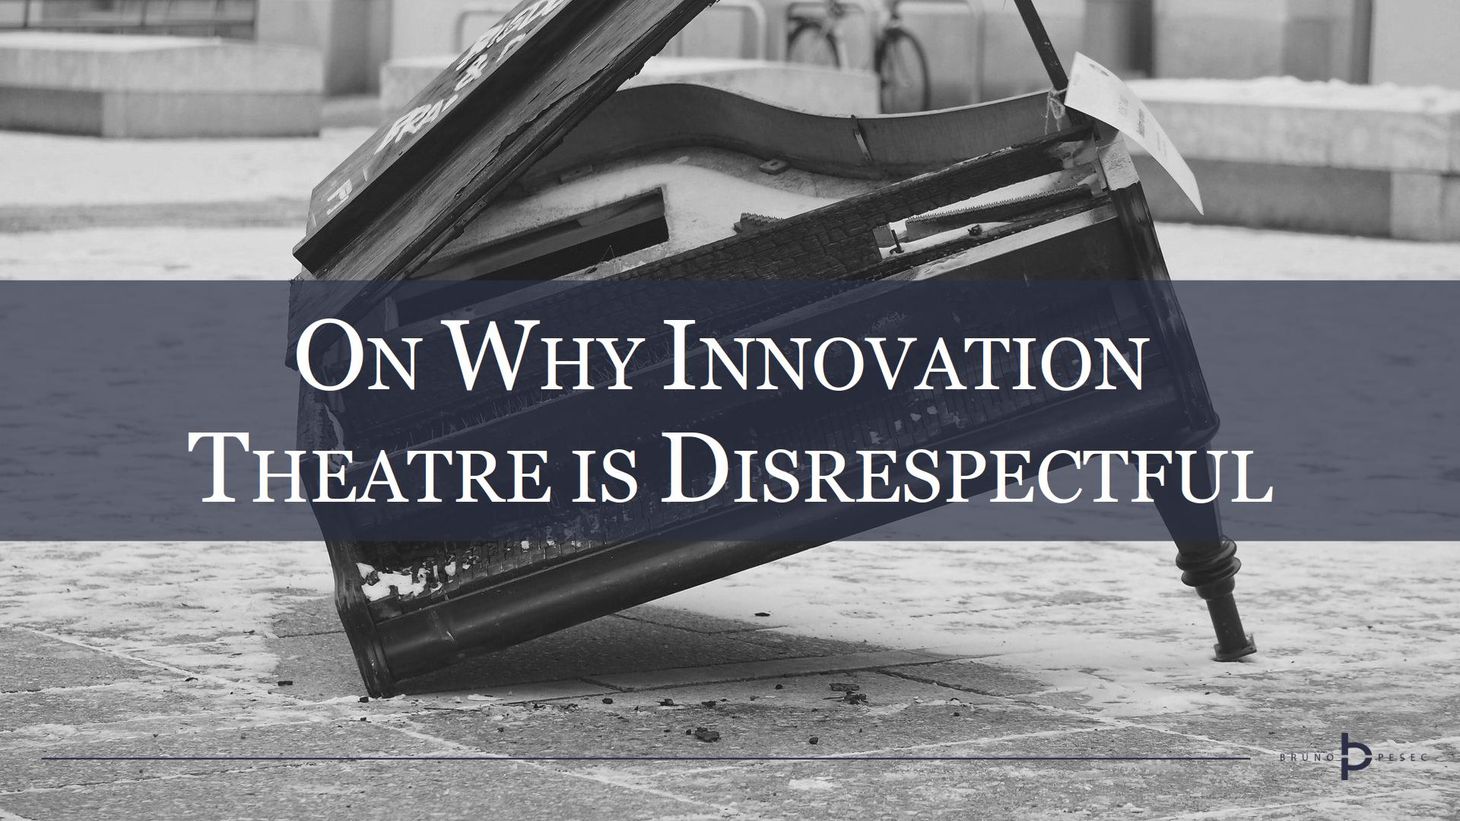 On why innovation theatre is disrespectful